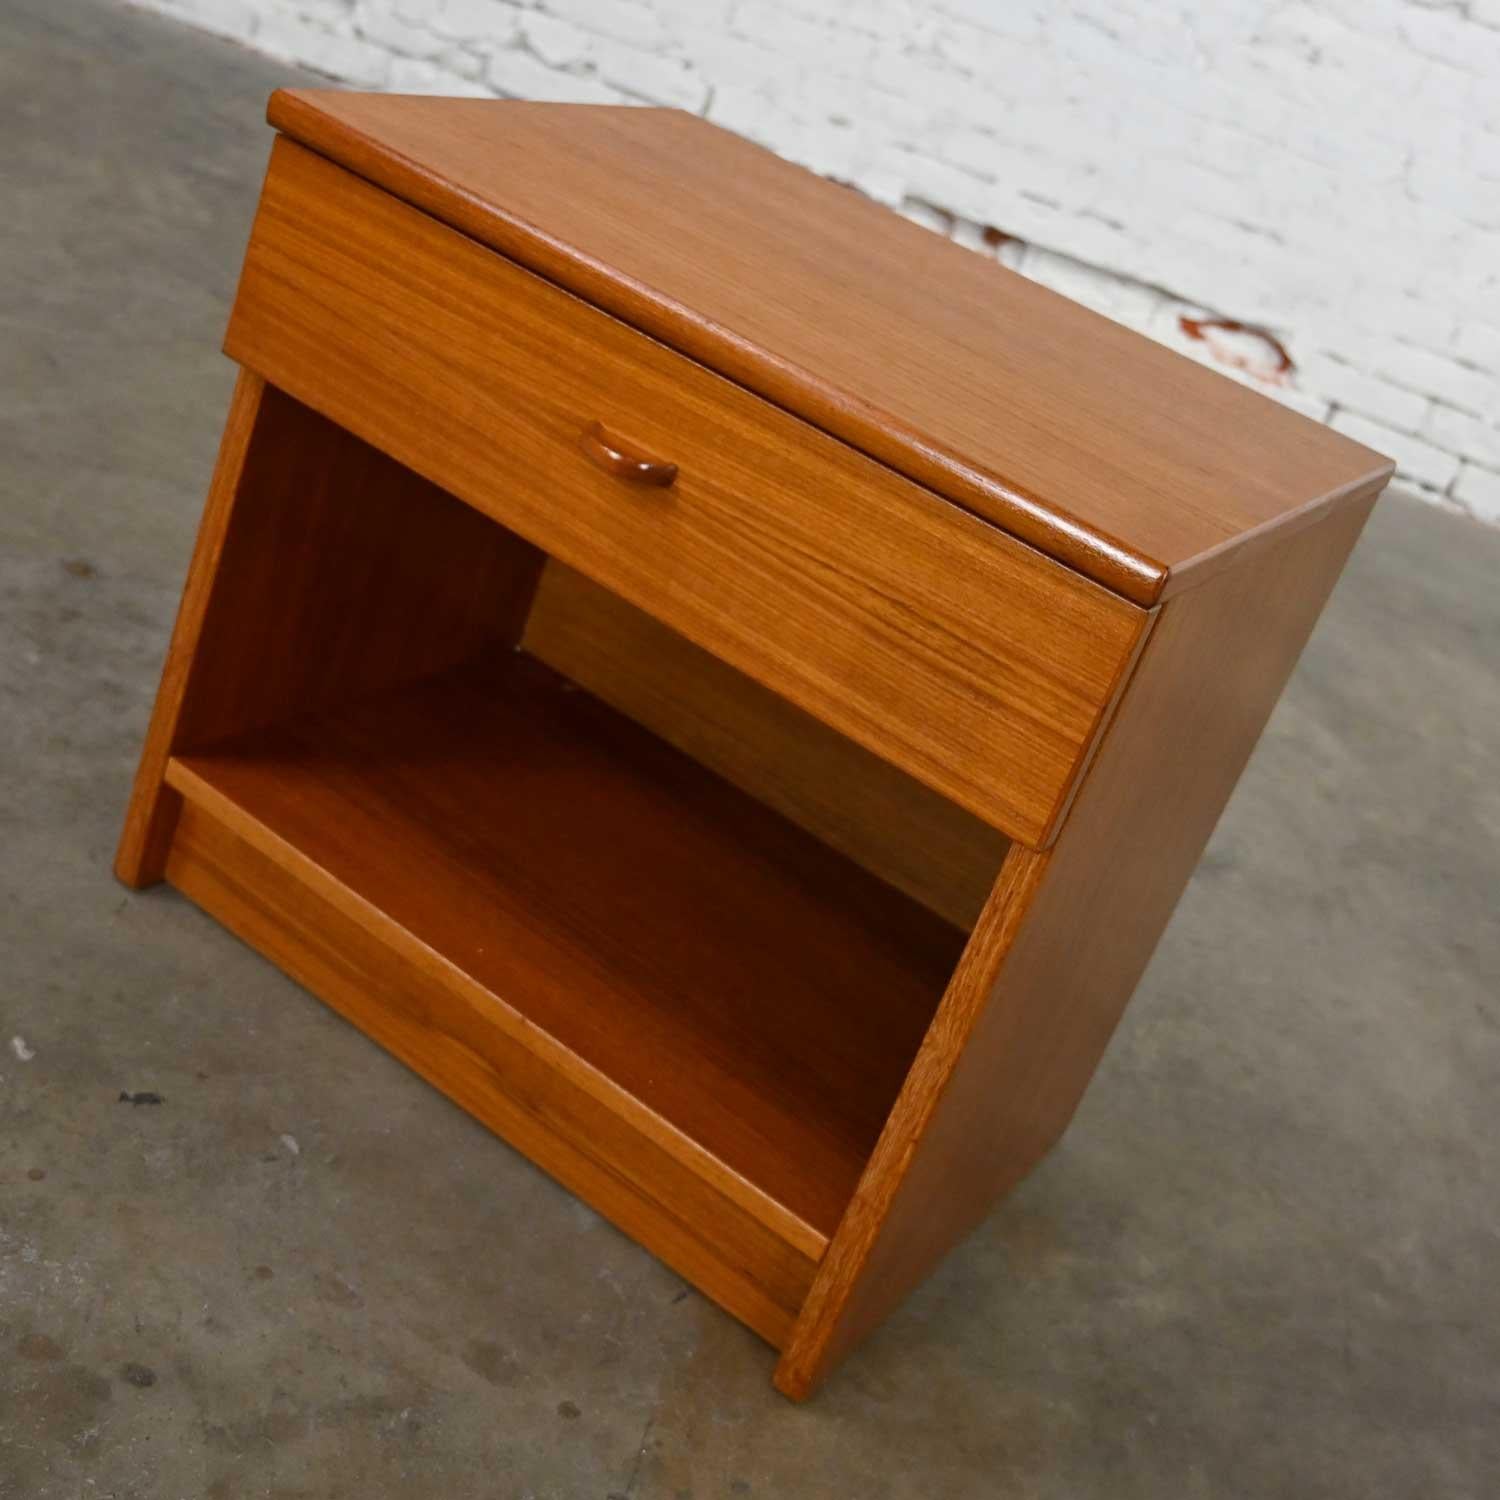 Scandinavian Modern Teak Nightstand End Table Cabinet with Drawer by FBJ Mobler In Good Condition For Sale In Topeka, KS